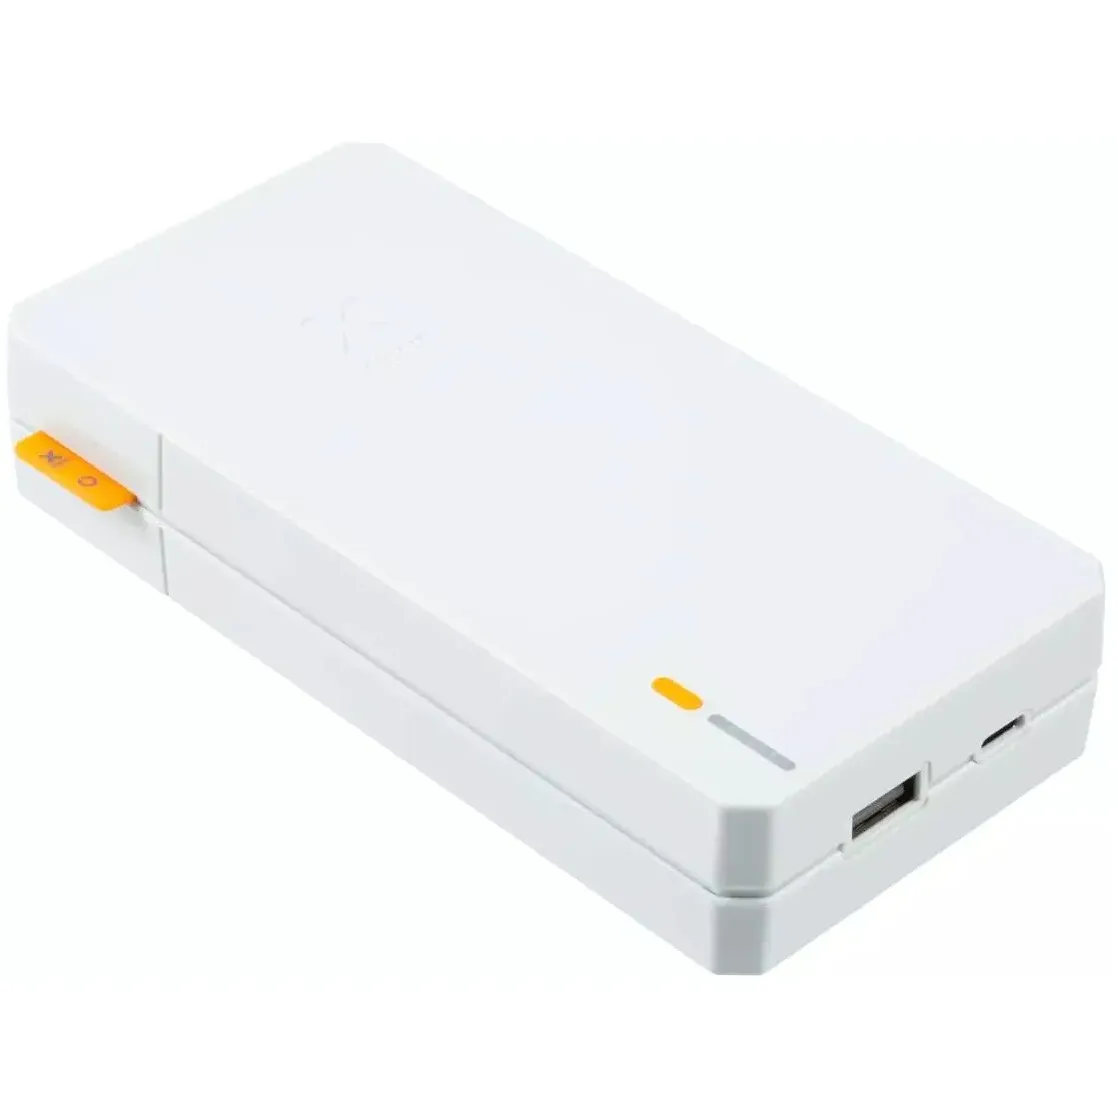 Xtorm Essential Powerpack  20000 mAh  Cool White